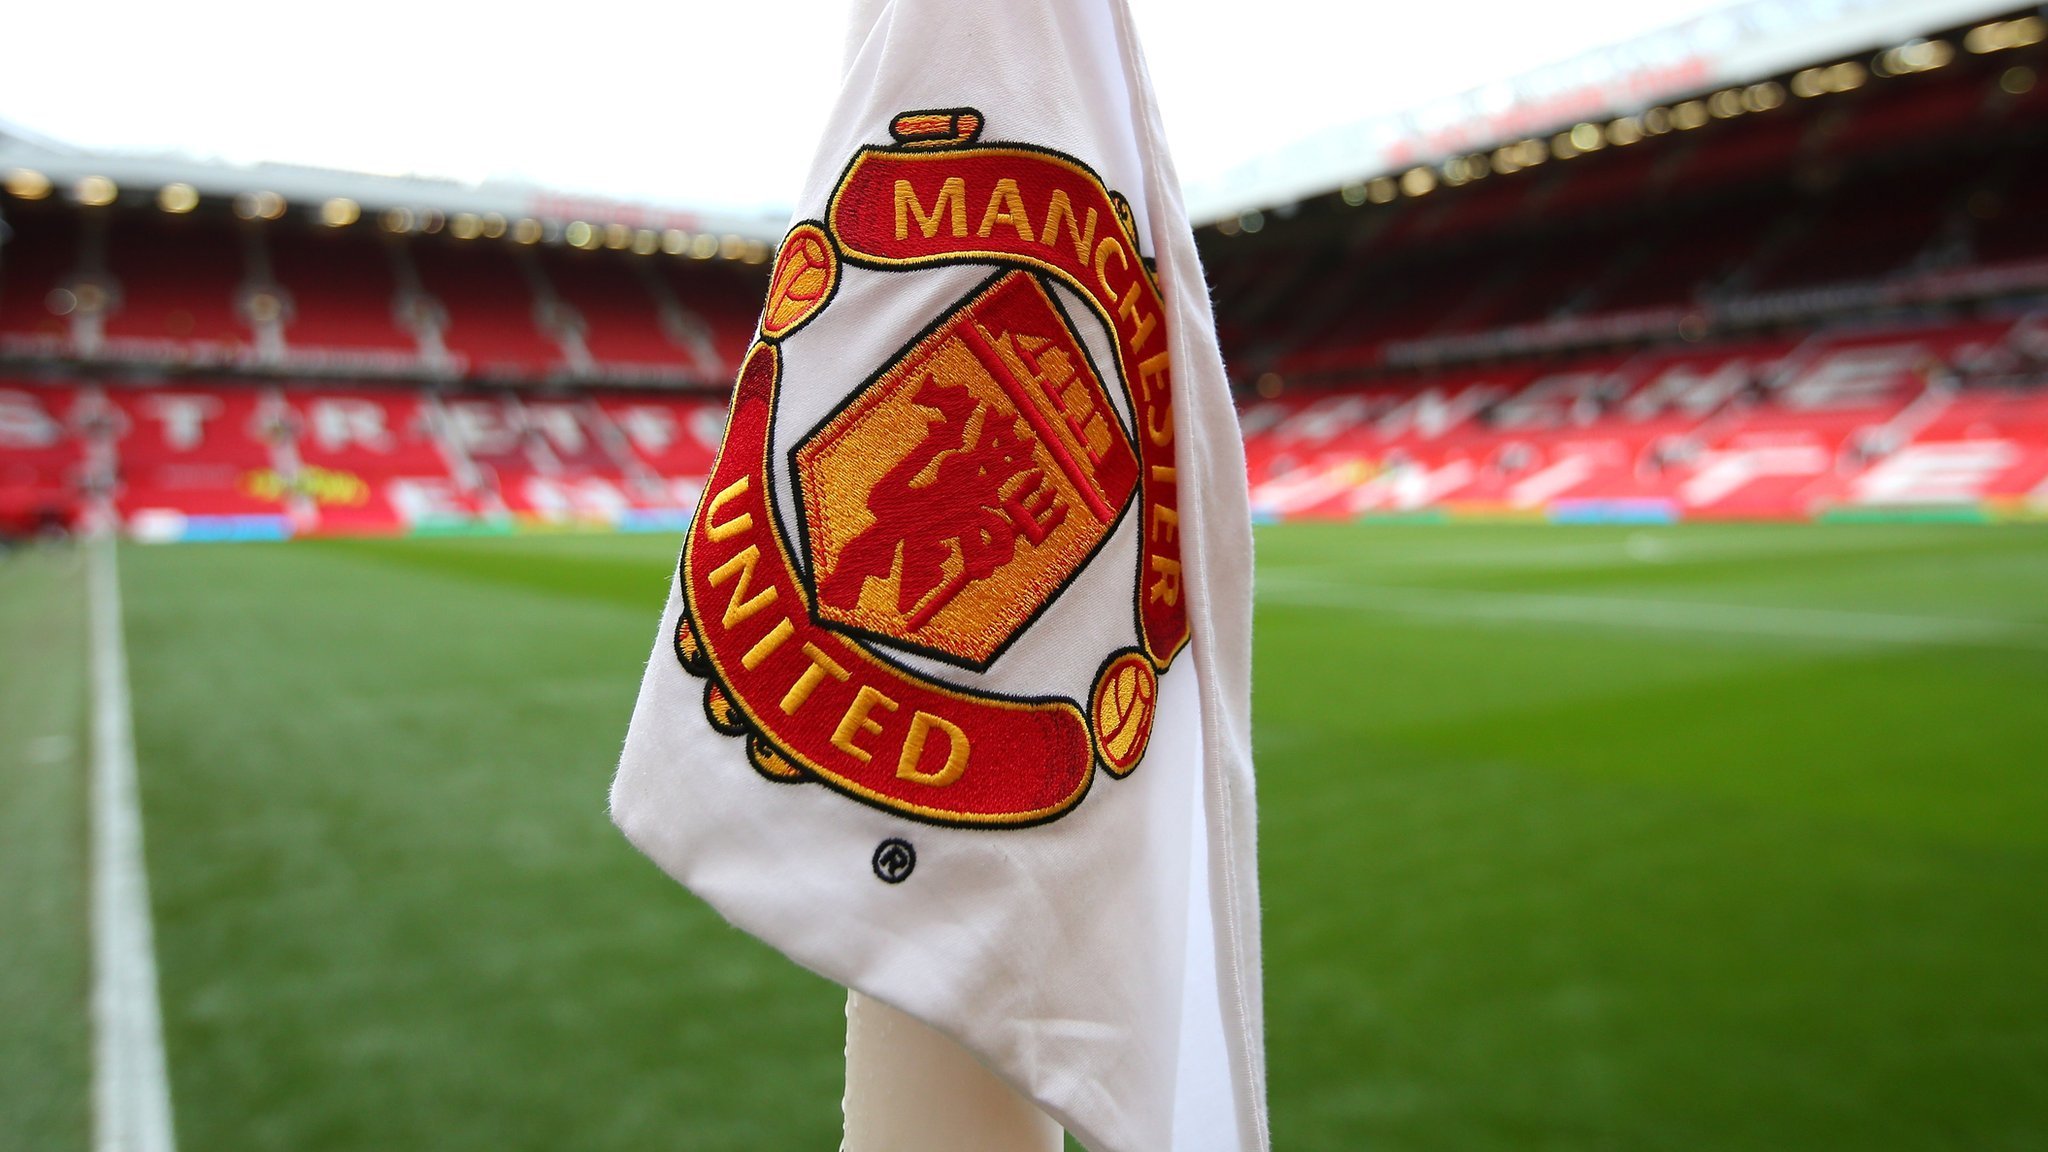 EPL: Two top stars removed from Man United's ideal XI for this season [Photo]